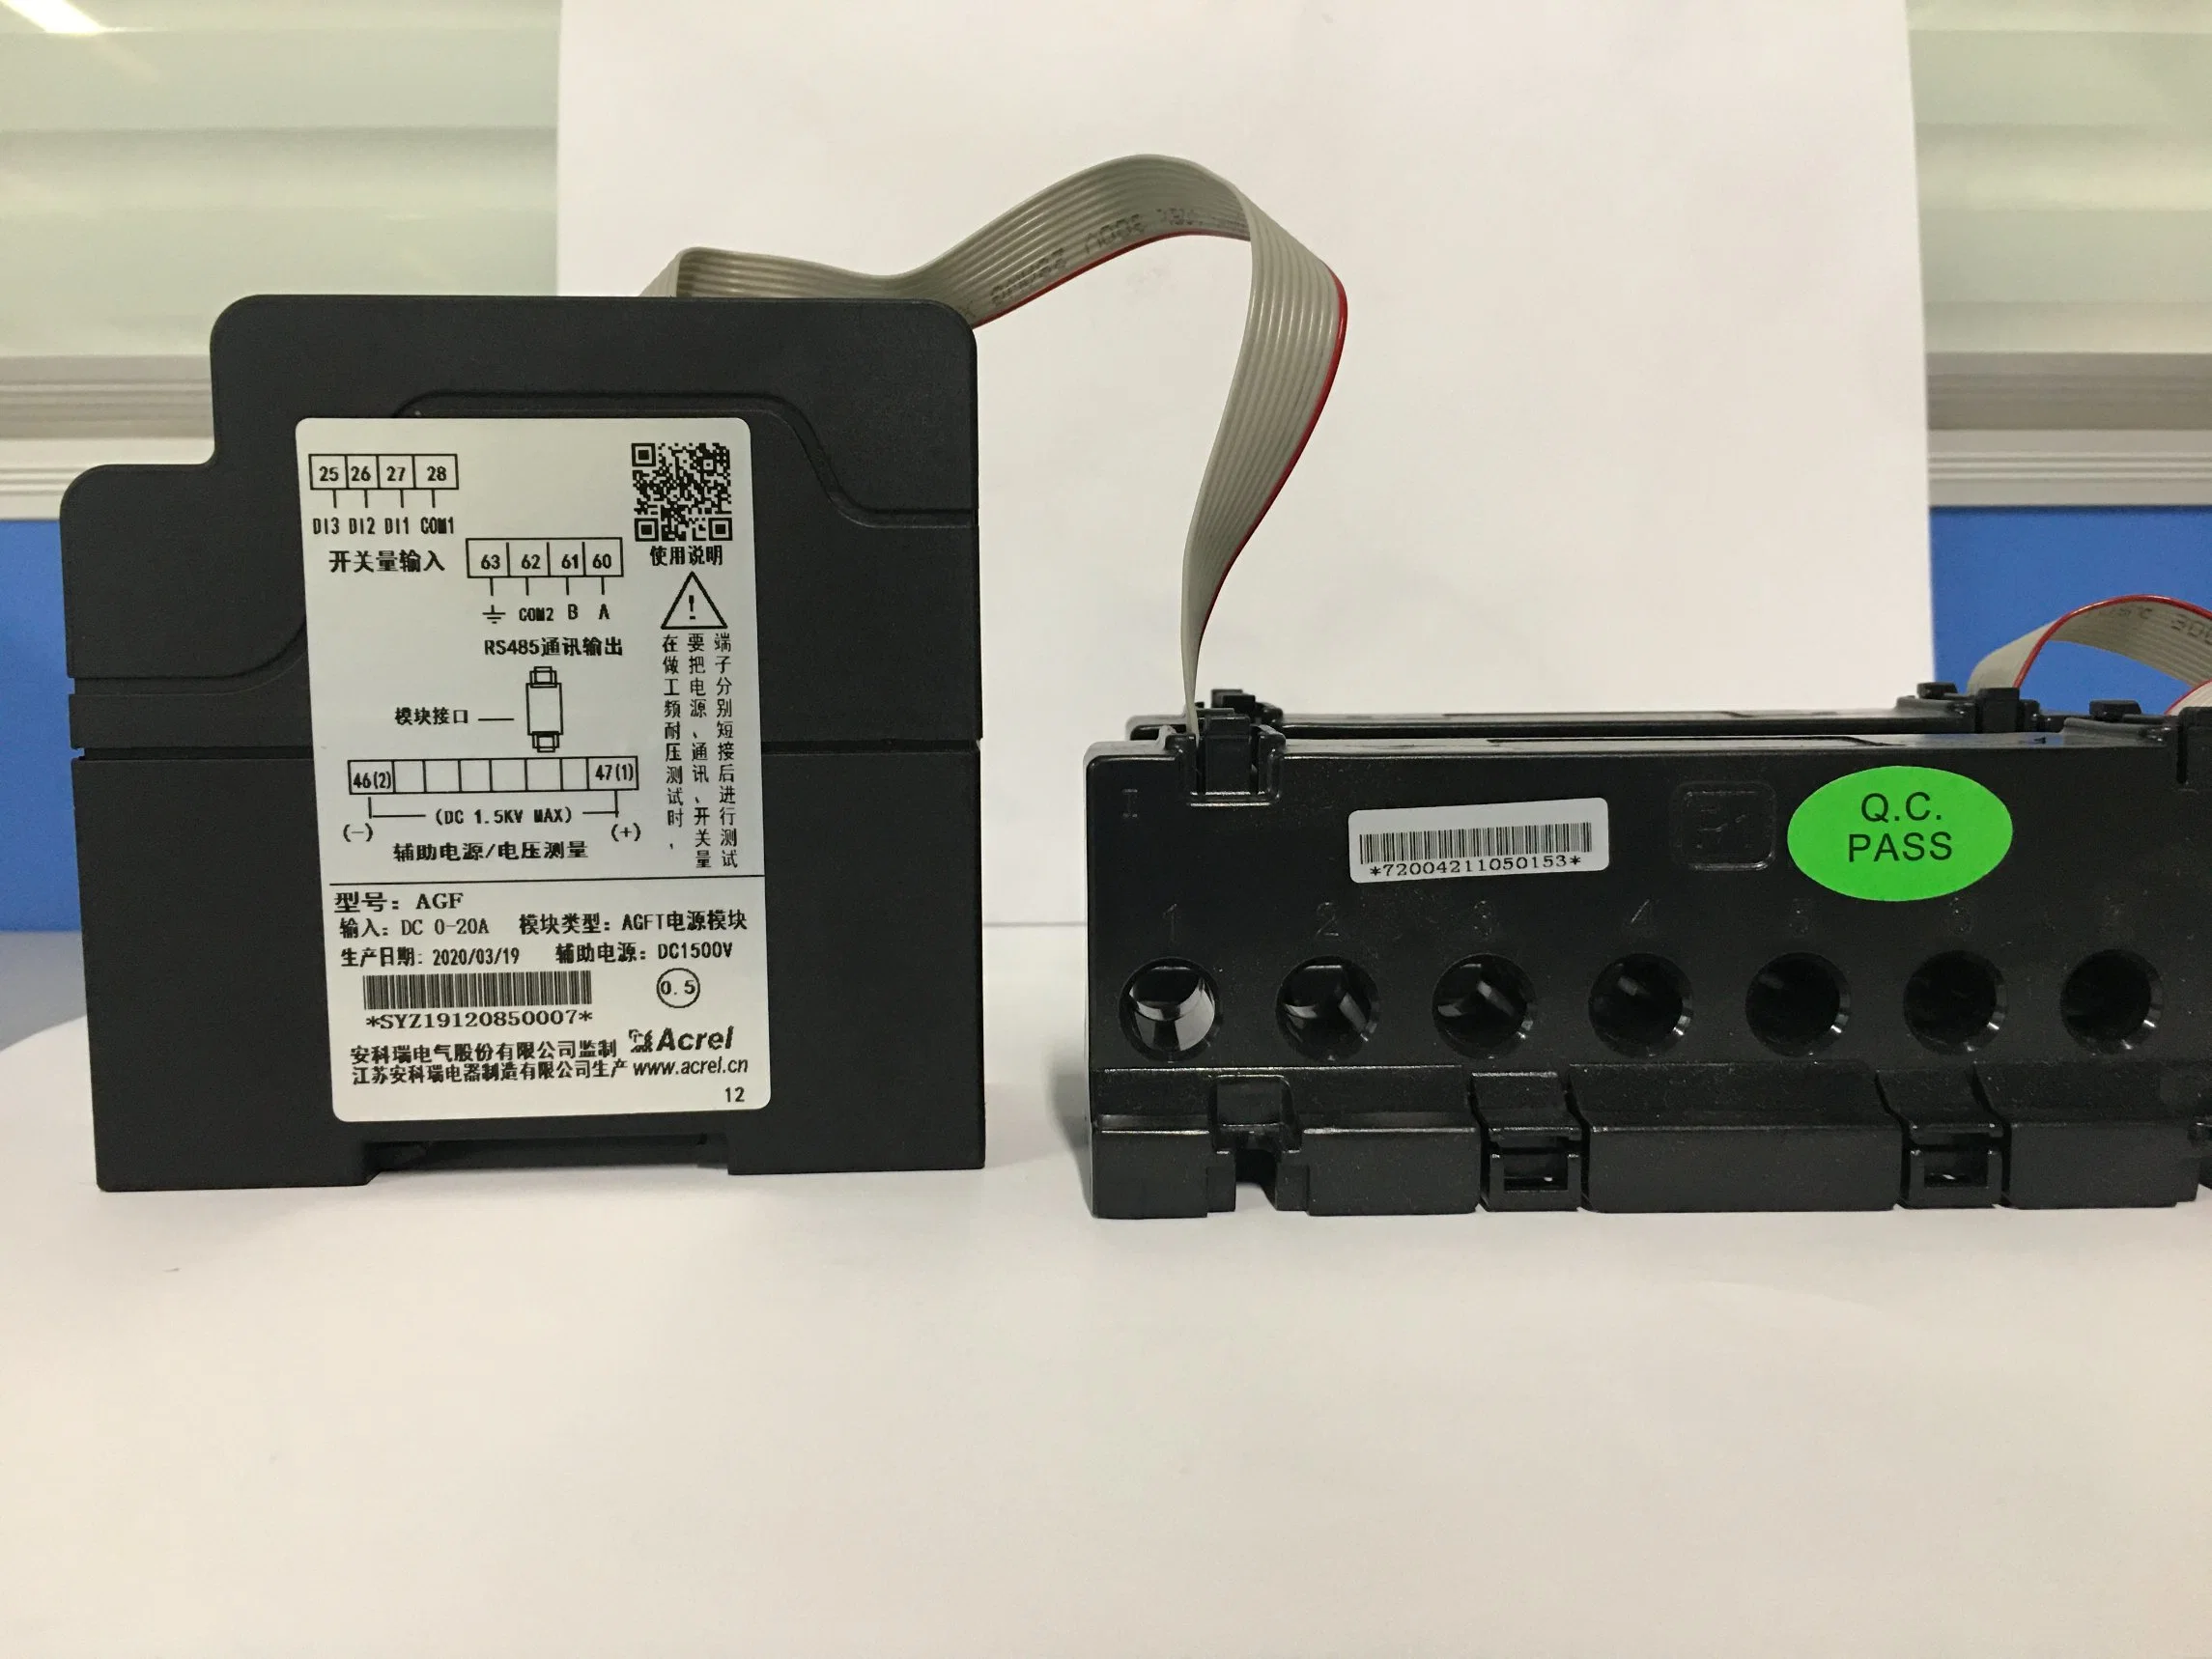 Acrel Agf-M24t DIN Rail Perforation Type PV Confluence Acquisition Device for Solar String Monitoring with RS485 Modbus Communication Port